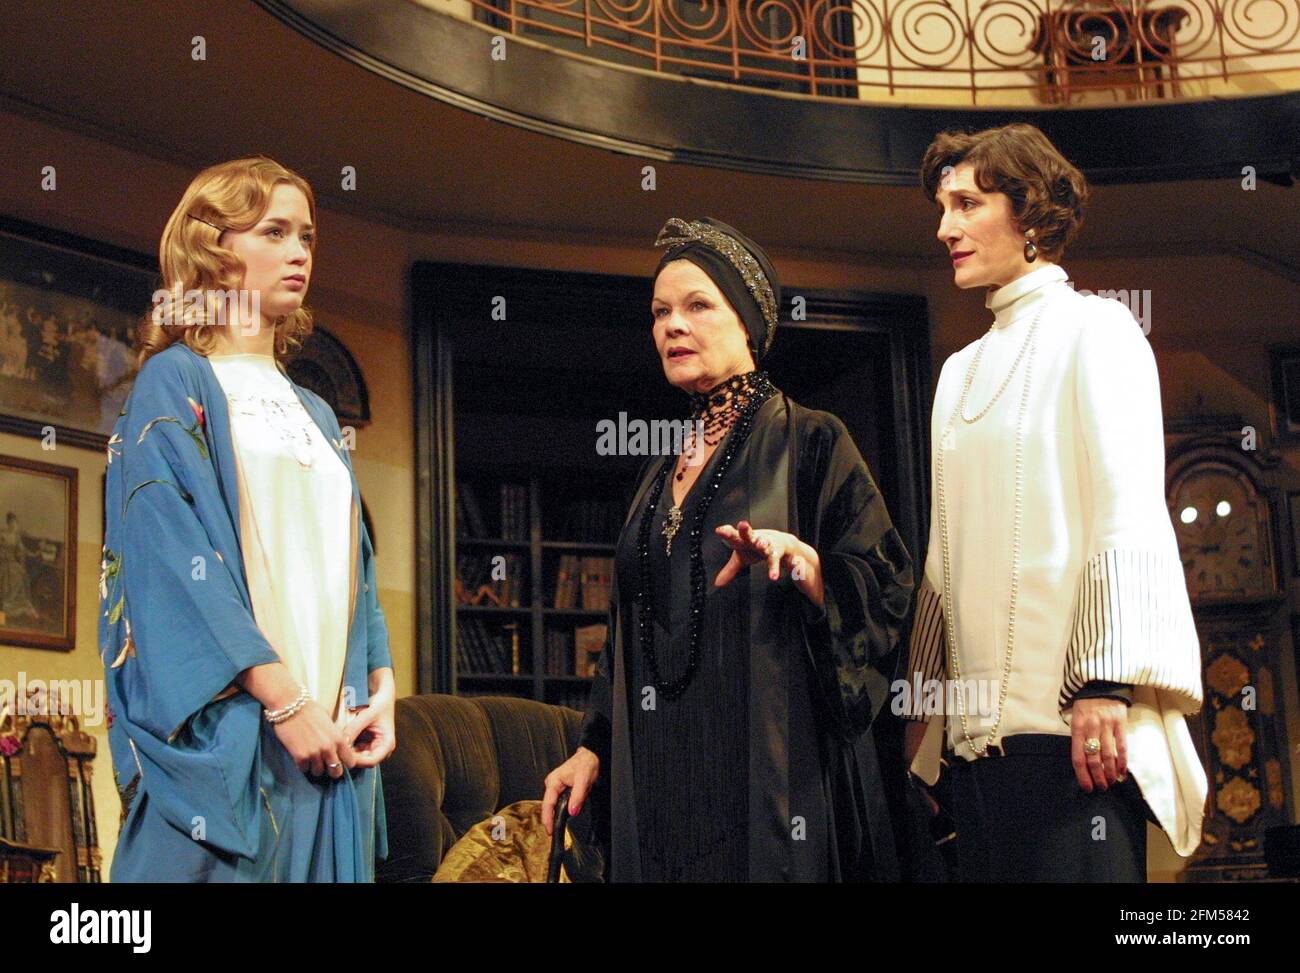 l-r: Emily Blunt (Gwen Cavendish), Judi Dench (Fanny Cavendish), Harriet Walter (Julie Cavendish) in THE ROYAL FAMILY by George S. Kaufman & Edna Ferber at the Theatre Royal Haymarket, London SW1  01/11/2001 design: Anthony Ward  lighting: Jon Buswell  director: Peter Hall Stock Photo